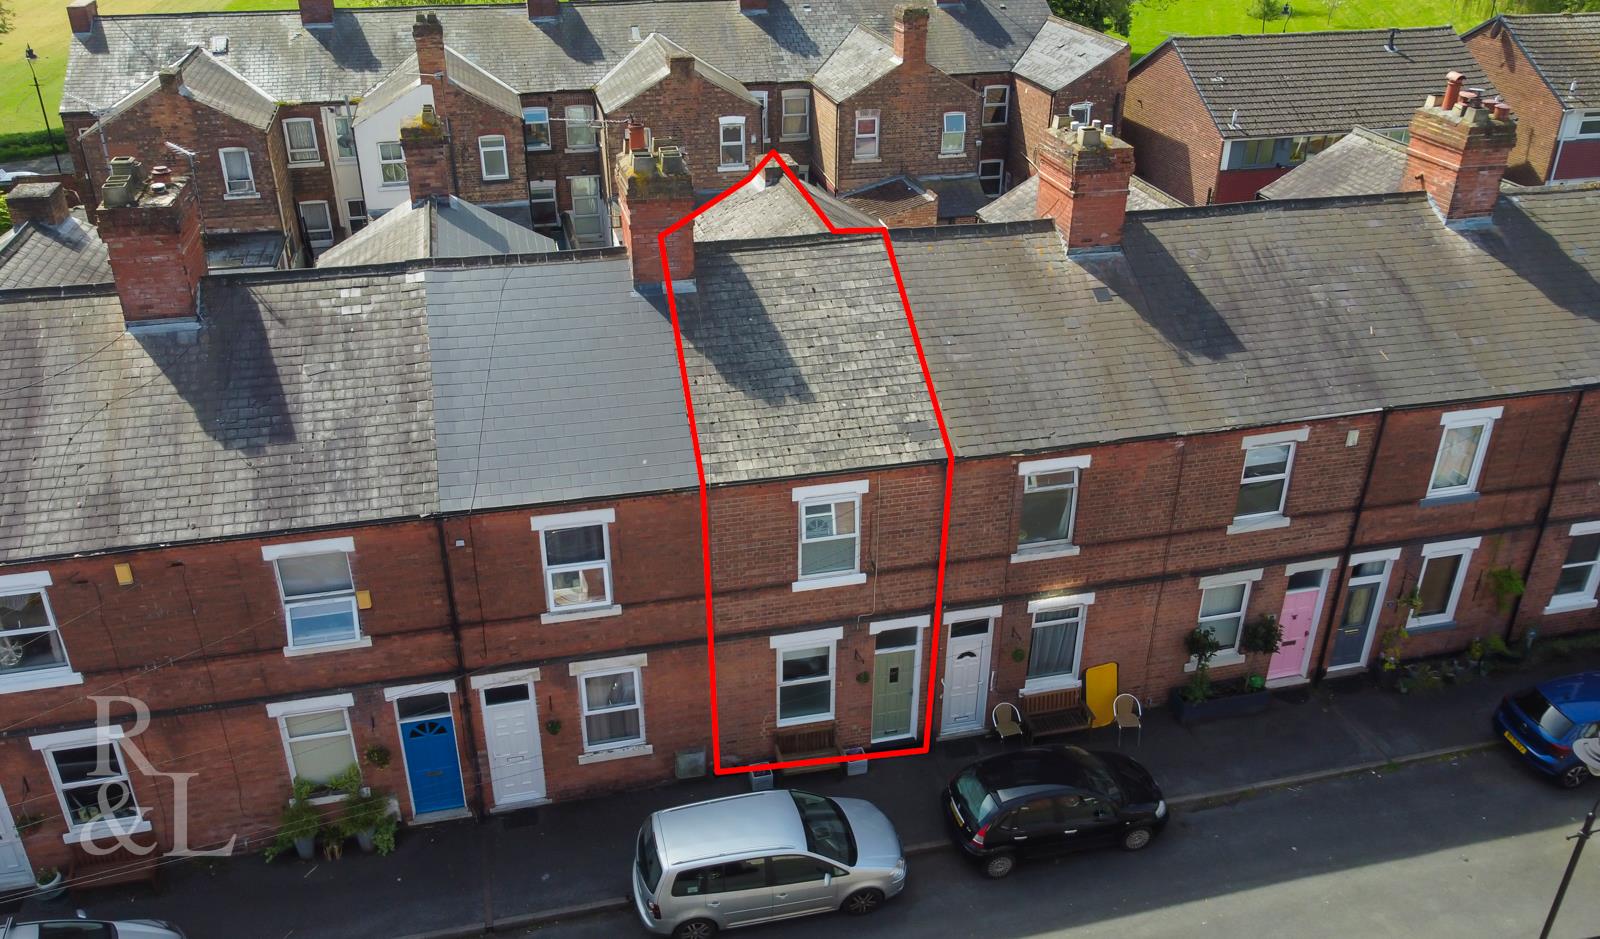 Property image for Ferriby Terrace, Meadows, Nottingham